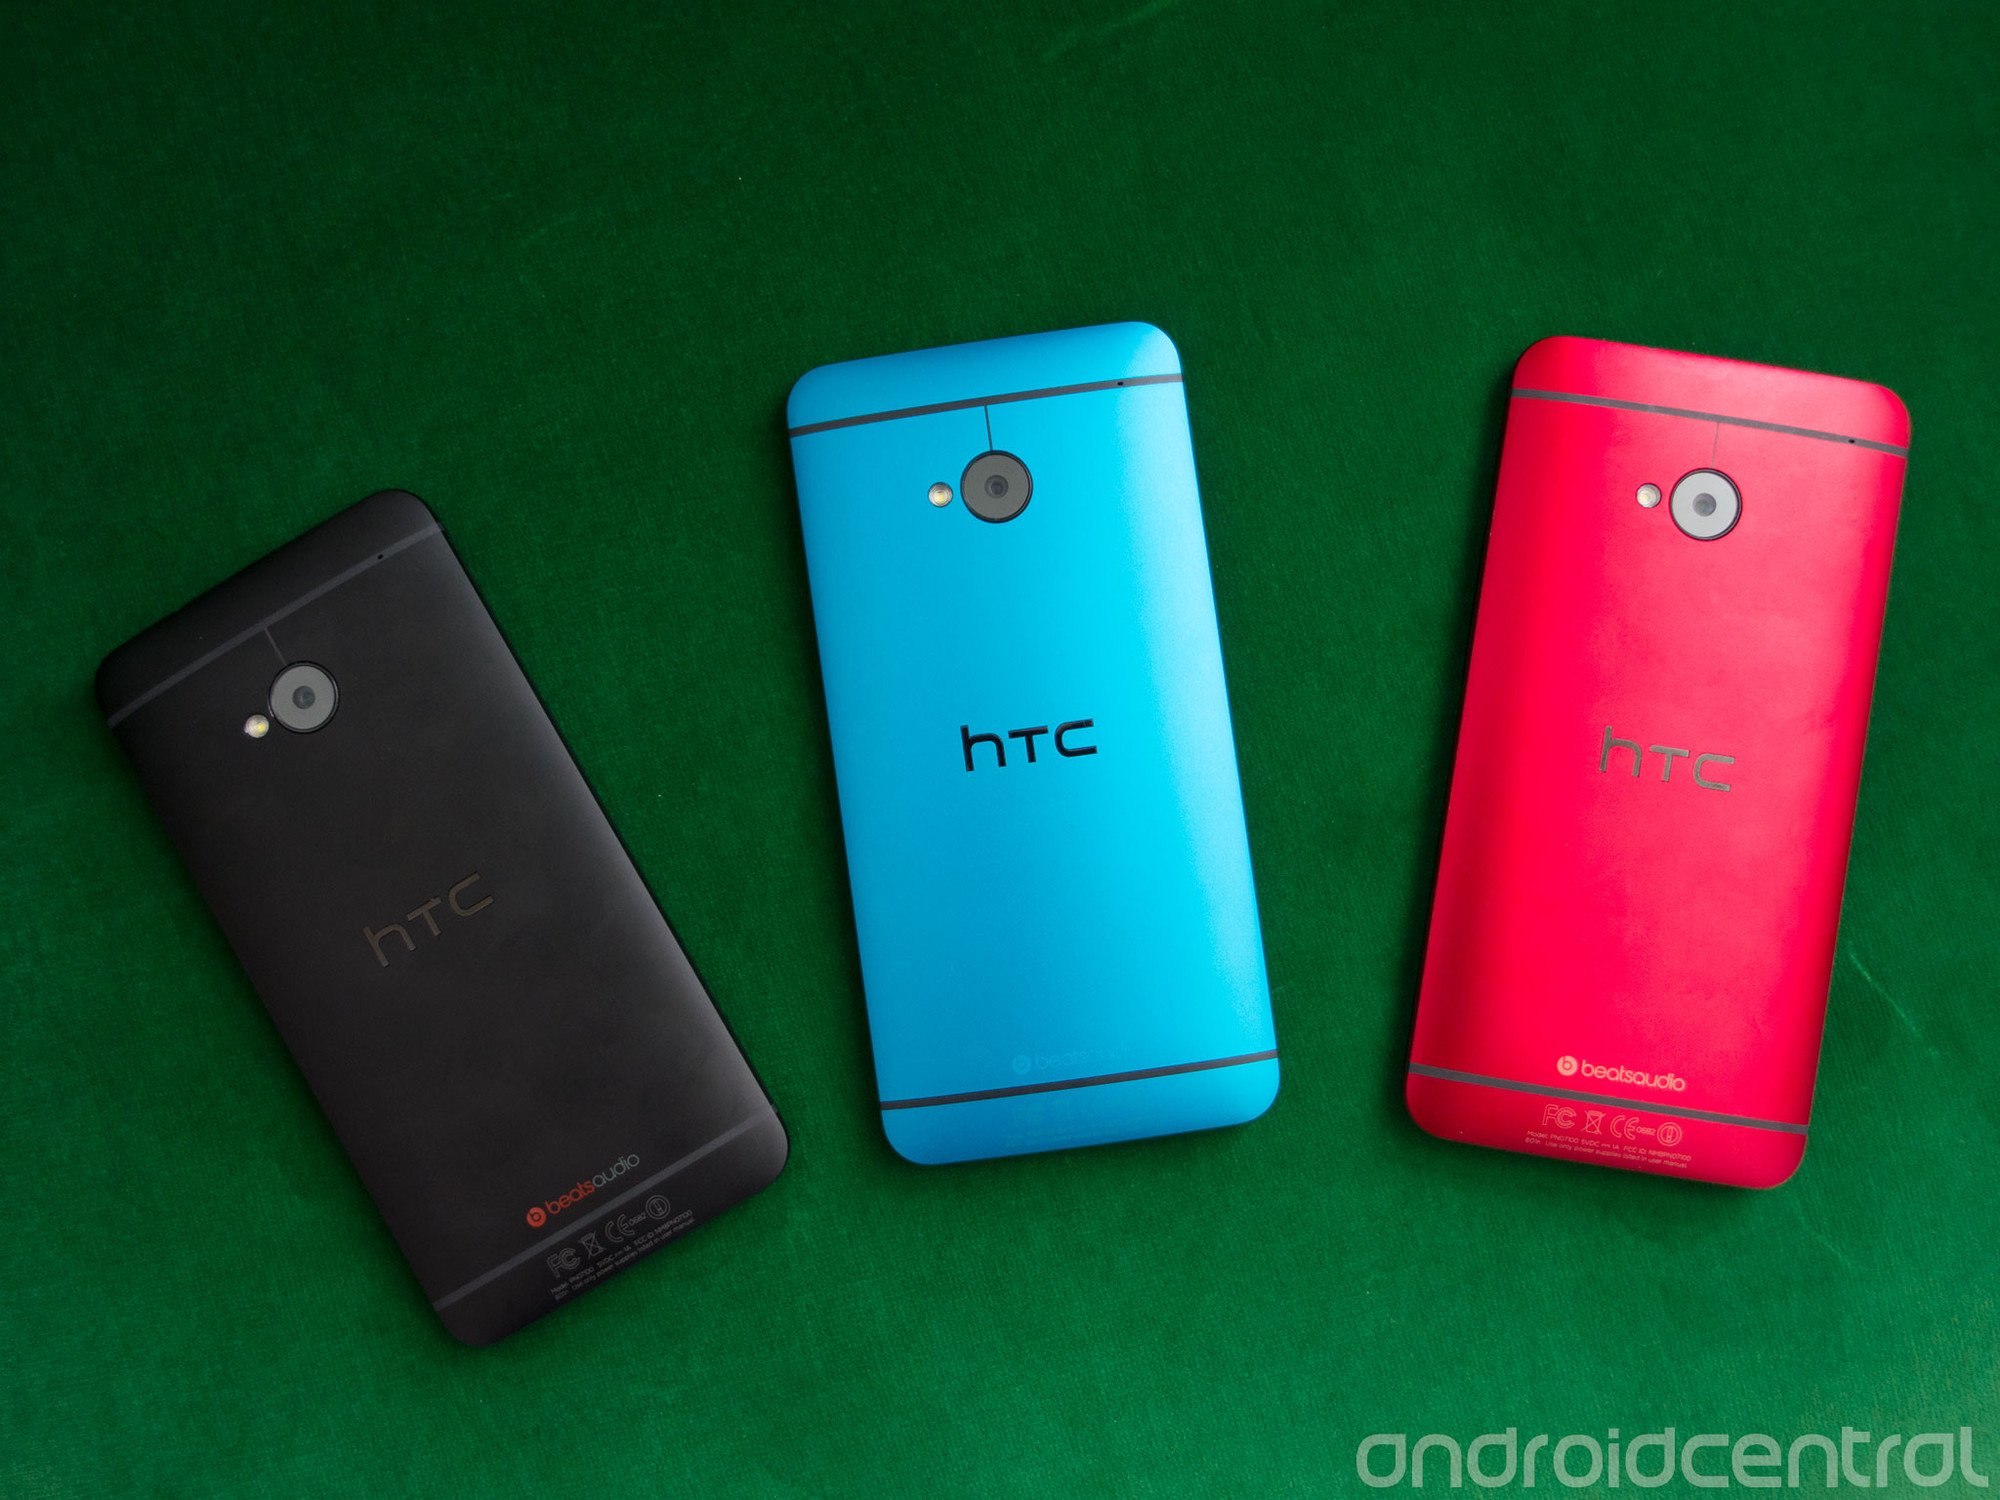 HTC One M7 in various colors